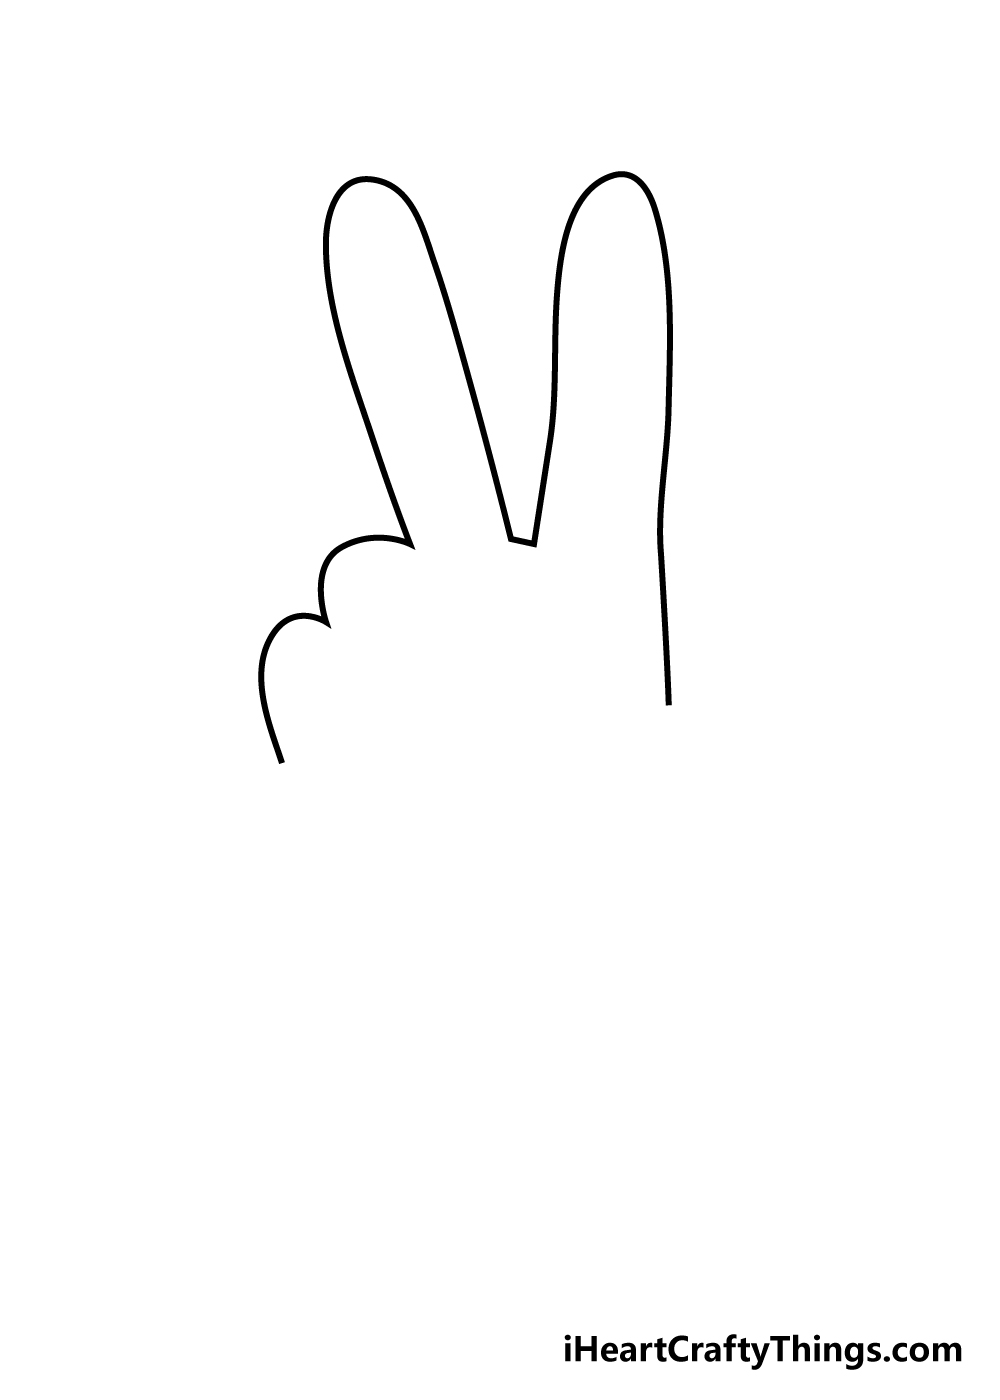 peace sign drawing step 1